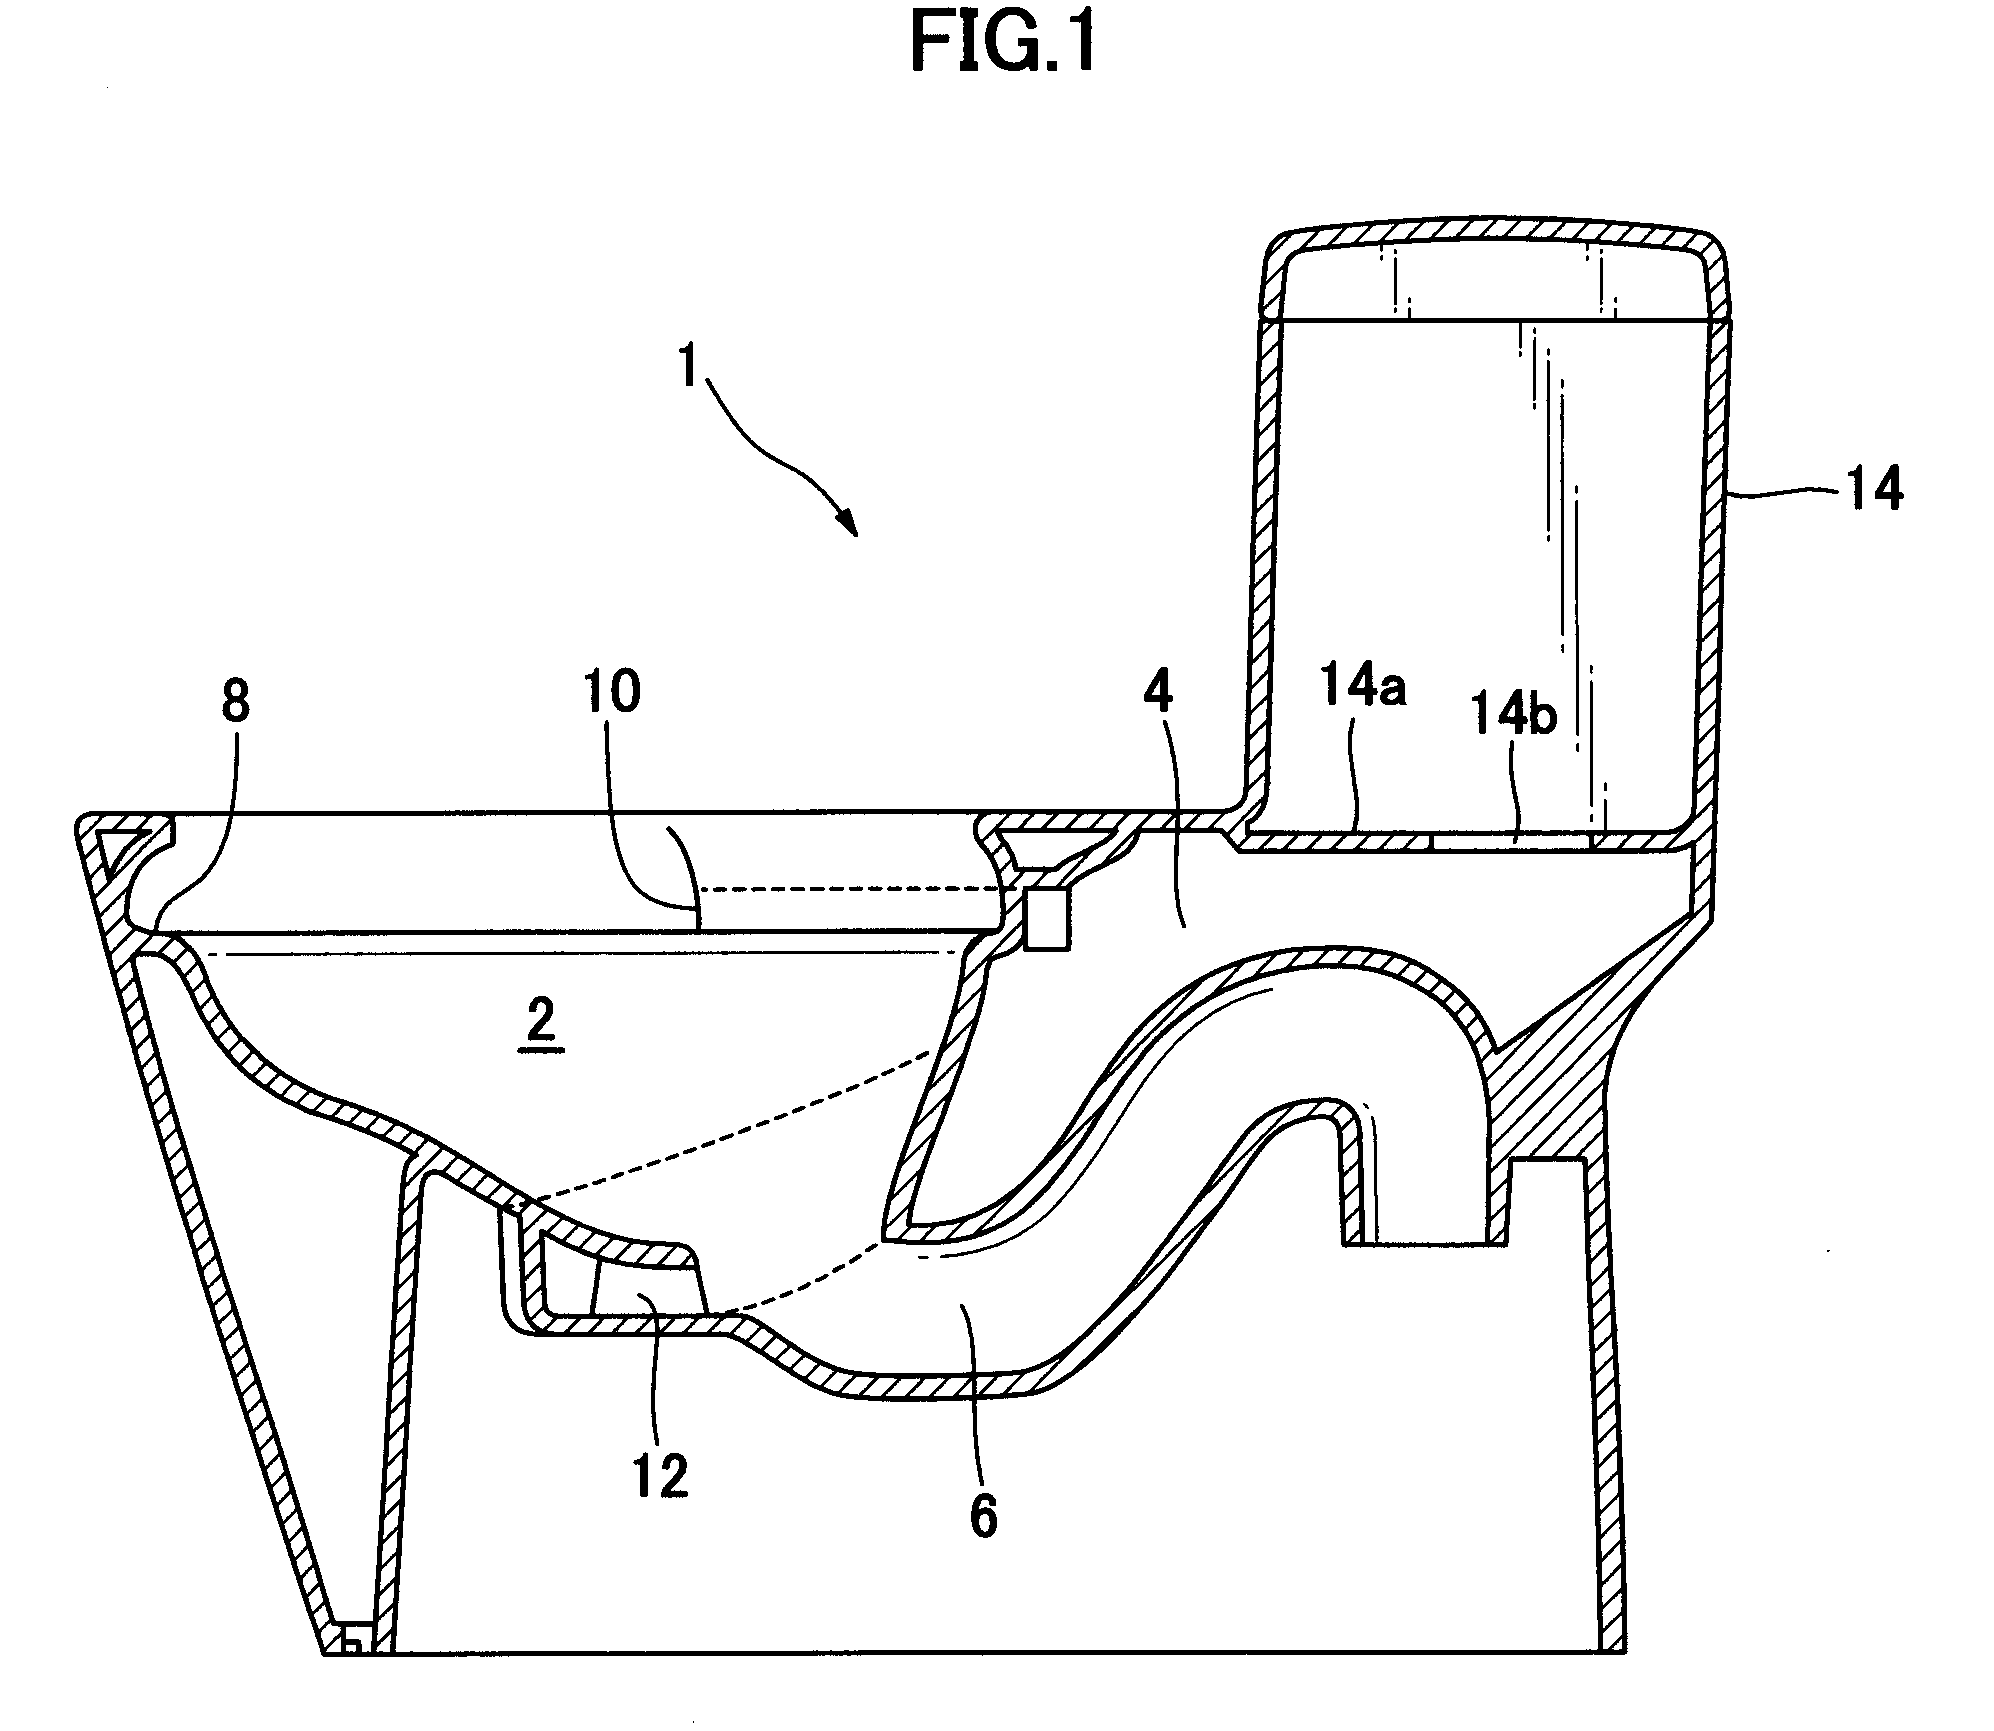 Toilet flush water supply device